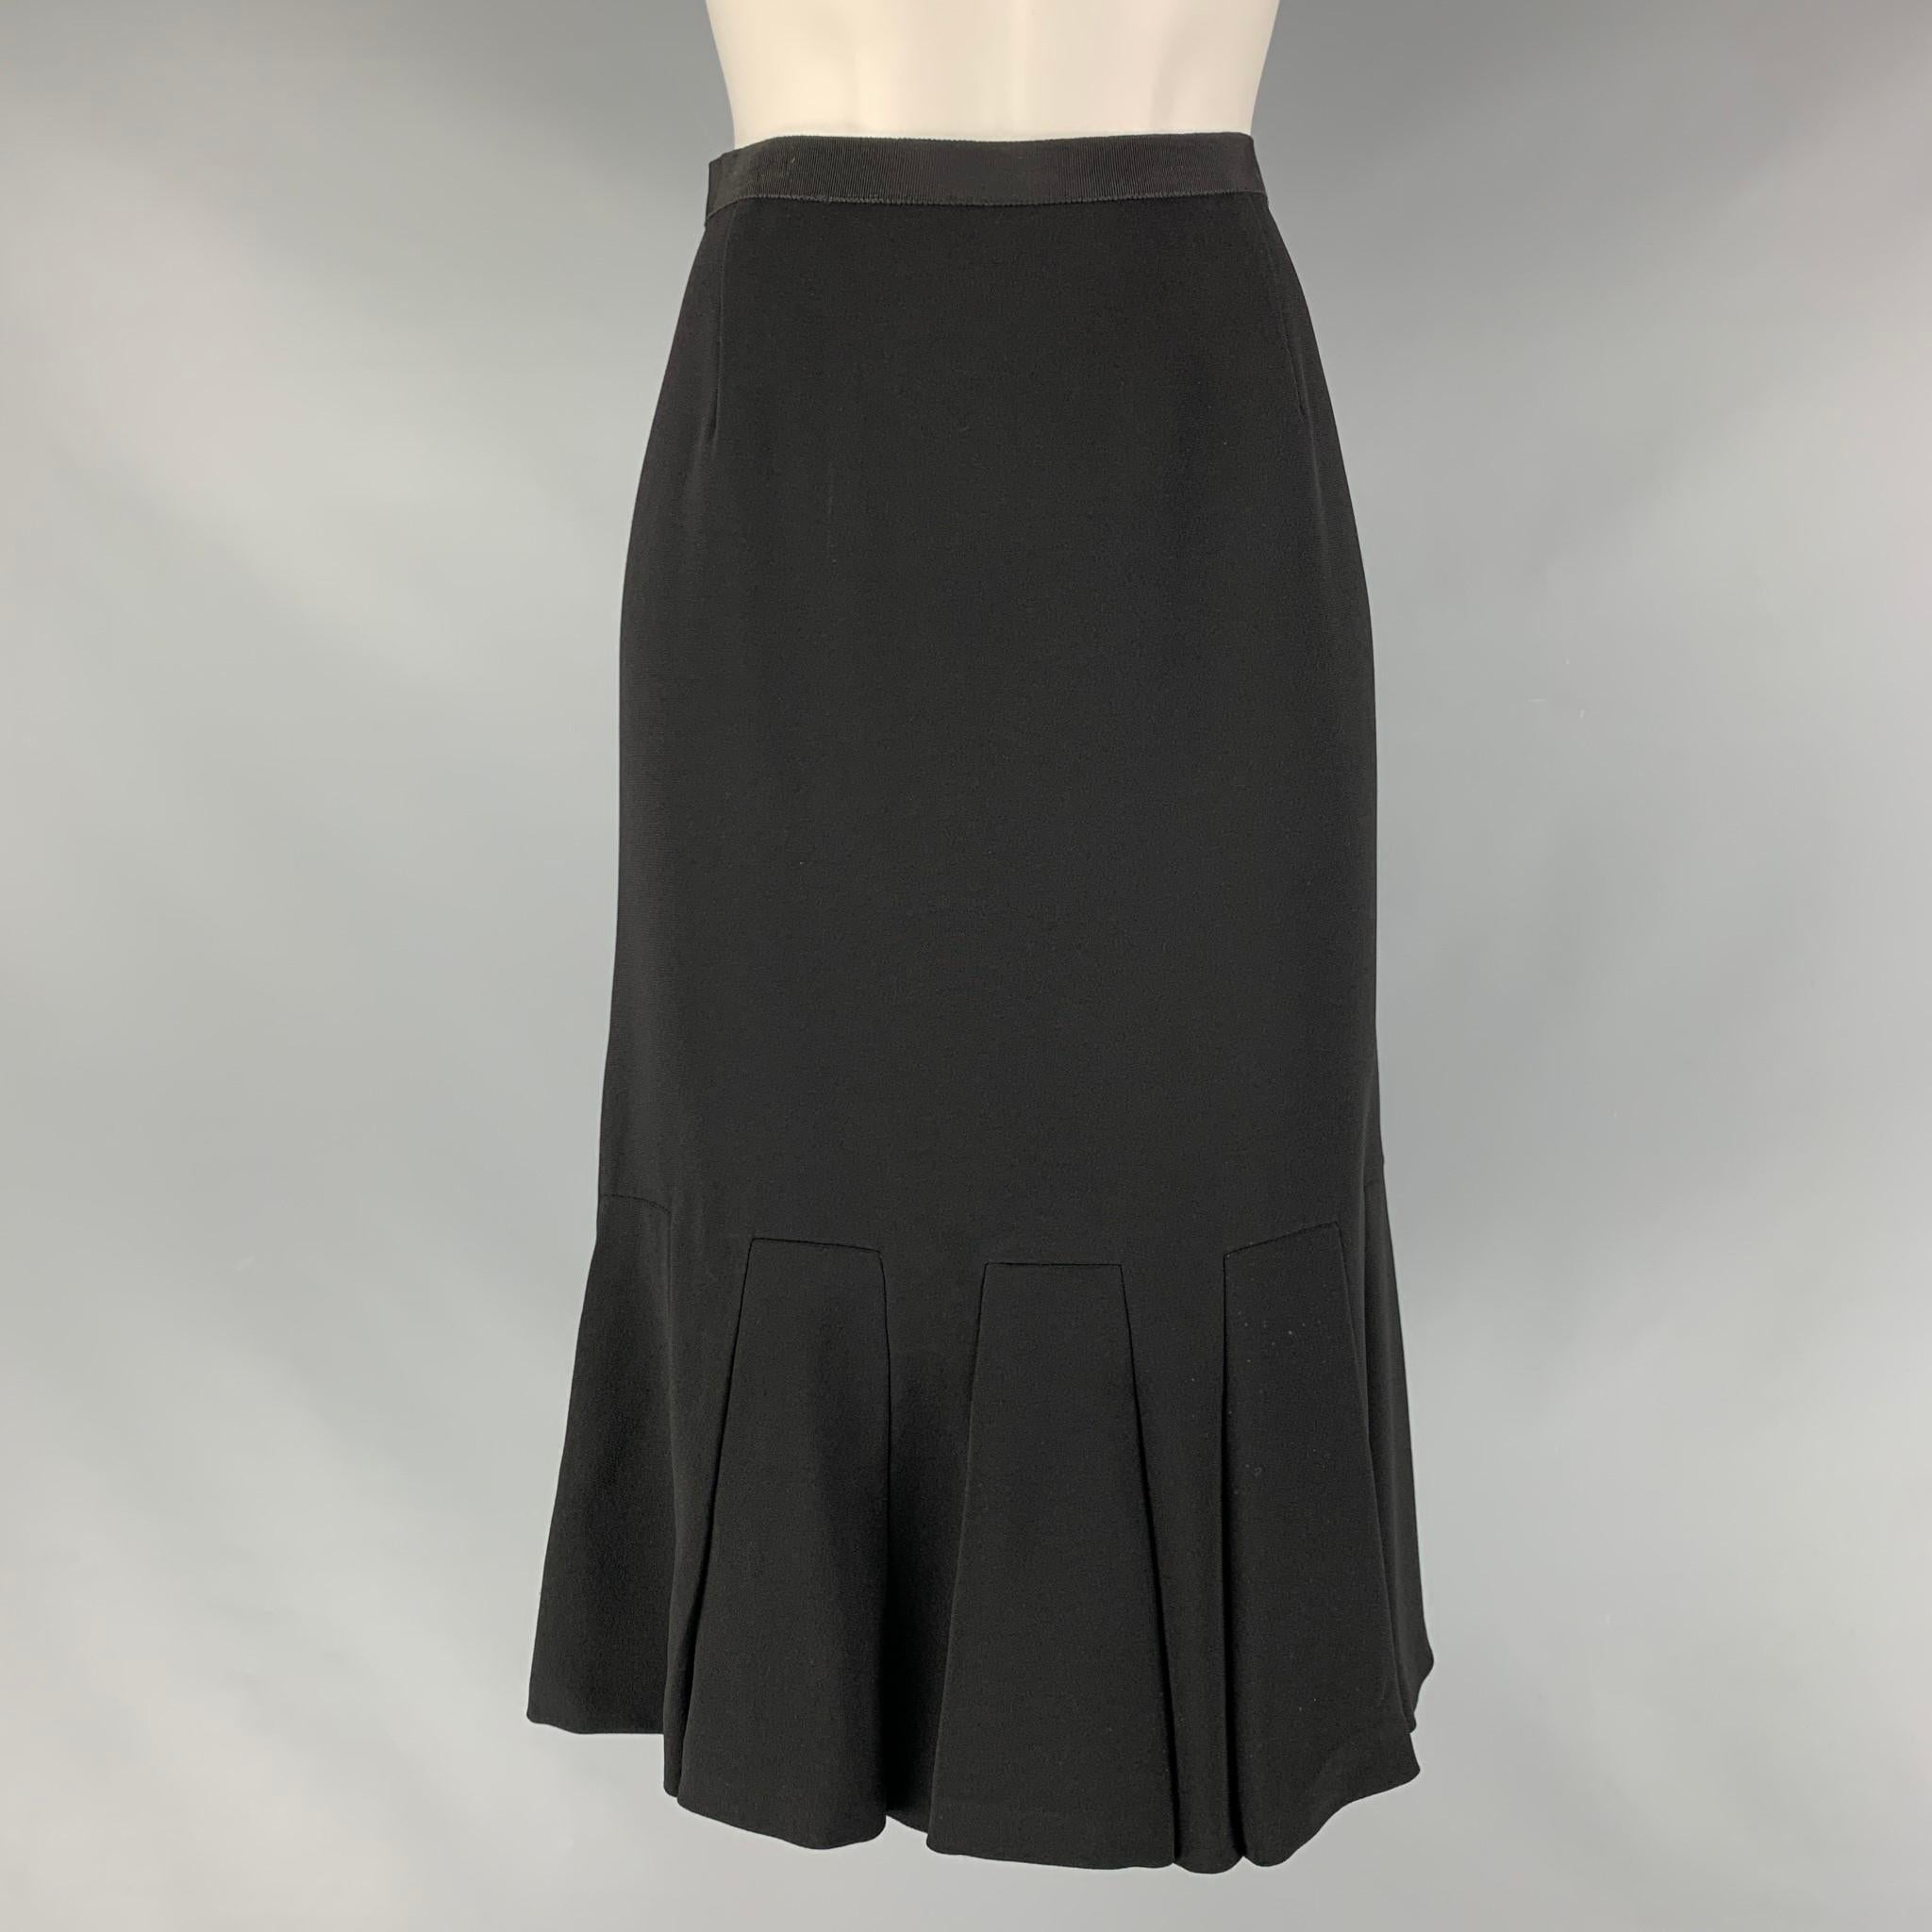 PRADA tulip skirt comes in a black acetate and viscose material featuring a ruffled hem, and a side seam invisible zip up closure. Made in Italy.

Excellent Pre-Owned Condition. Moderate Fading at waistband. As- is.
Marked: 40

Measurements:

Waist: